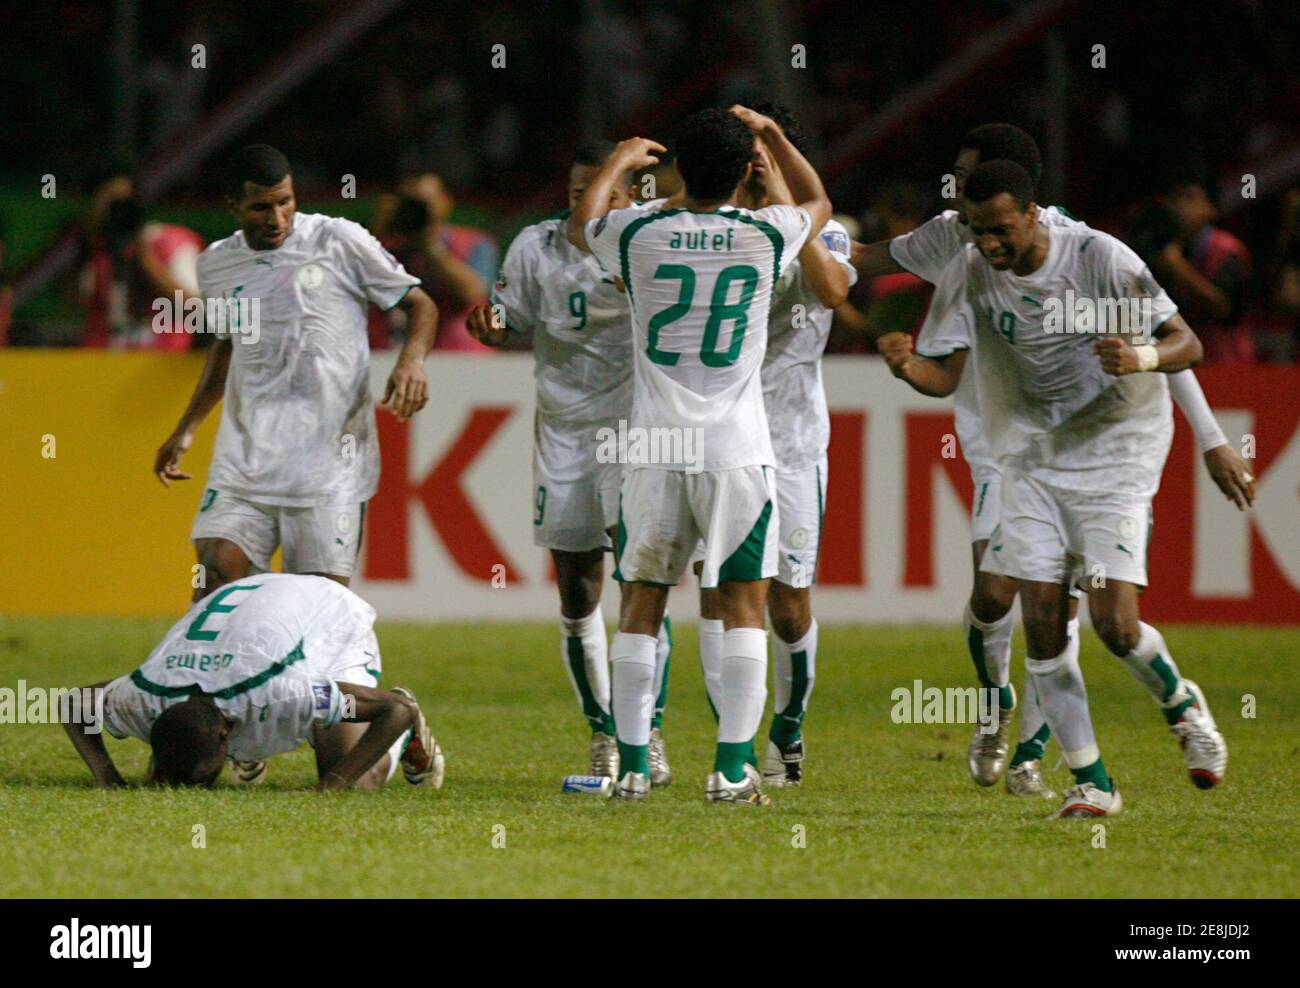 Saudi Arabia's players celebrate after a goal against Indonesia during their 2007 AFC Asian Cup Group D soccer match in Jakarta July 14, 2007. REUTERS/Beawiharta (INDONESIA) Stock Photo